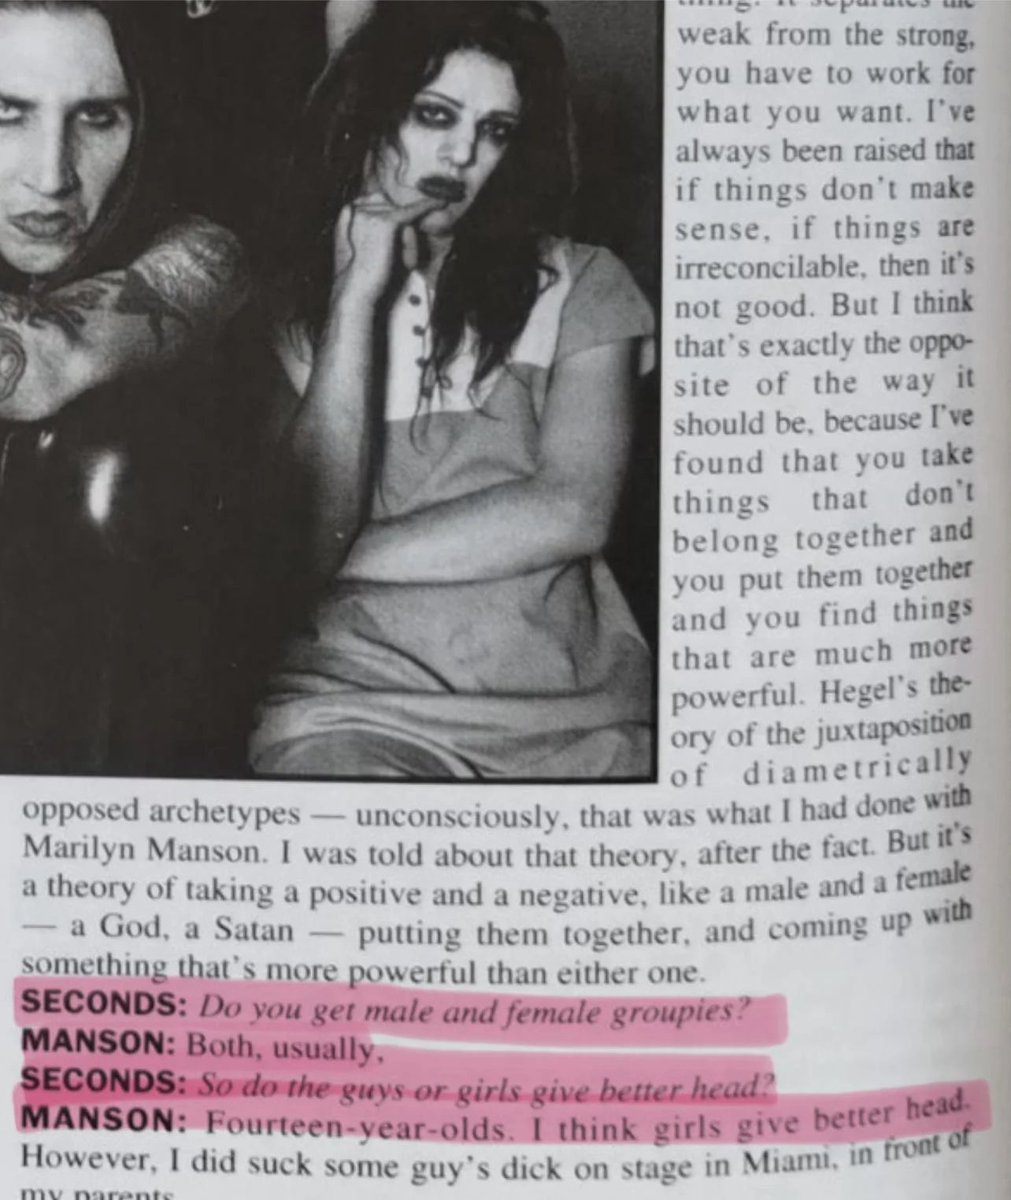 Marilyn Manson did an interview with the Rock culture magazine SECONDS, when he was 25, in which he discussed having sex with 14 year old girls. This article was recently shared on Reddit, h/t Open_Window3003. reddit.com/r/IStandWithHe…